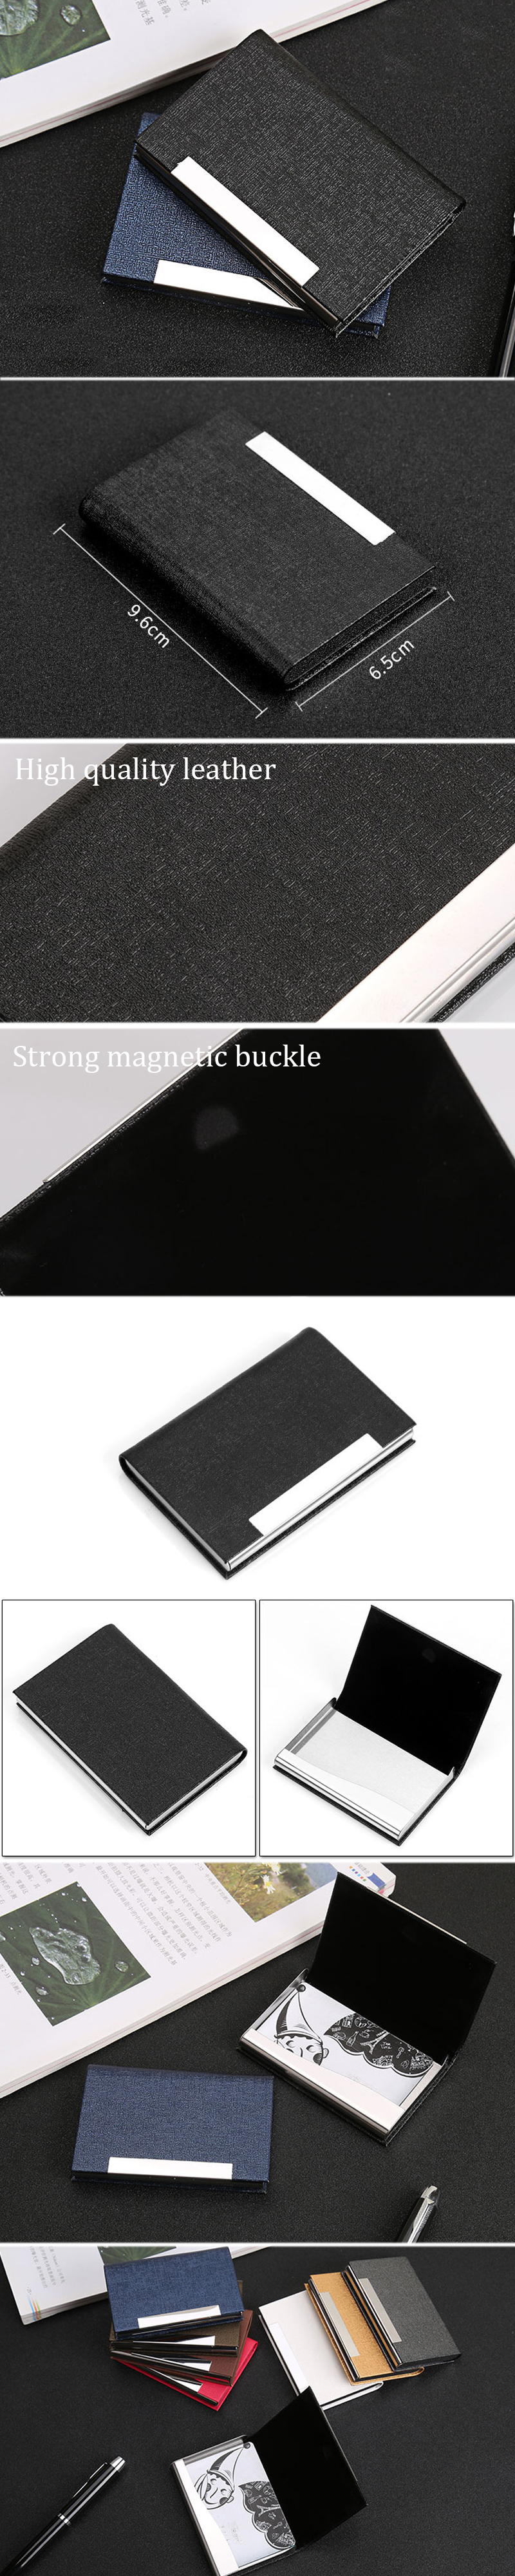 IPReereg-Stainless-Steel-Card-Holder-Credit-Card-Case-Portable-ID-Card-Storage-Box-Business-Travel-1364442-1